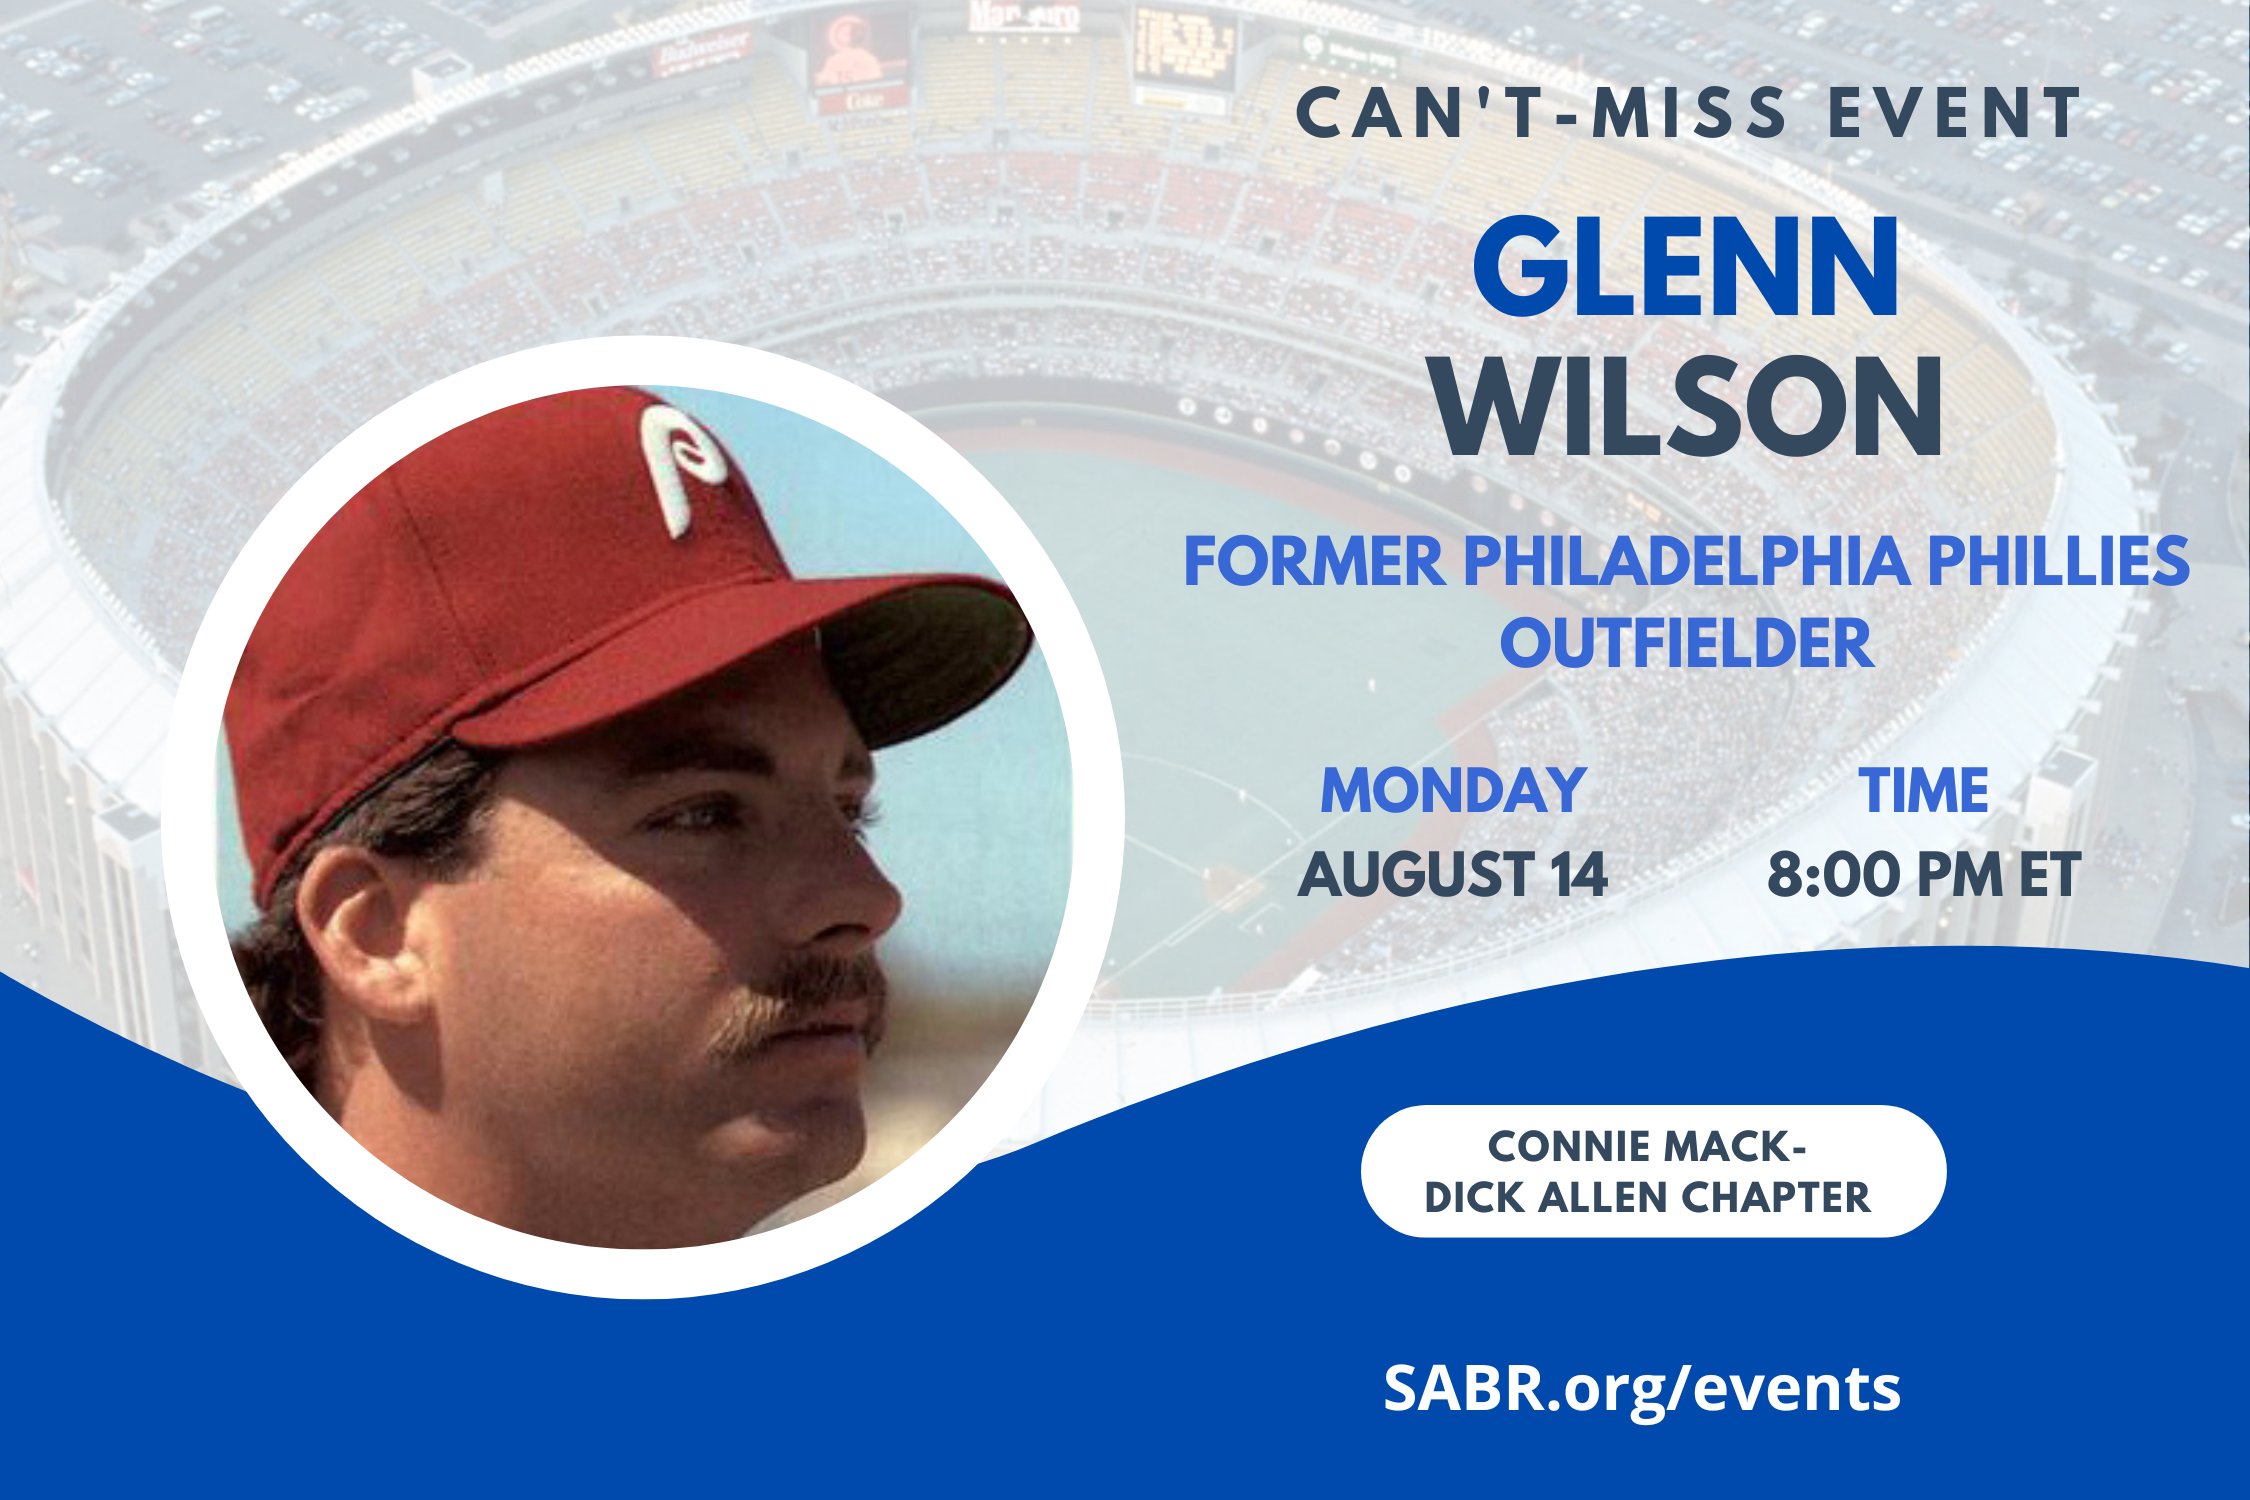 SABR's Dick Allen-Connie Mack Chapter in Philadelphia will hold a virtual Zoom meeting on Monday, August 14 at 8:00 pm ET. All baseball fans are welcome to attend. We will host a Q&A with former Phillies outfielder Glenn Wilson. To RSVP for this Zoom meeting, please contact Matt Albertson.